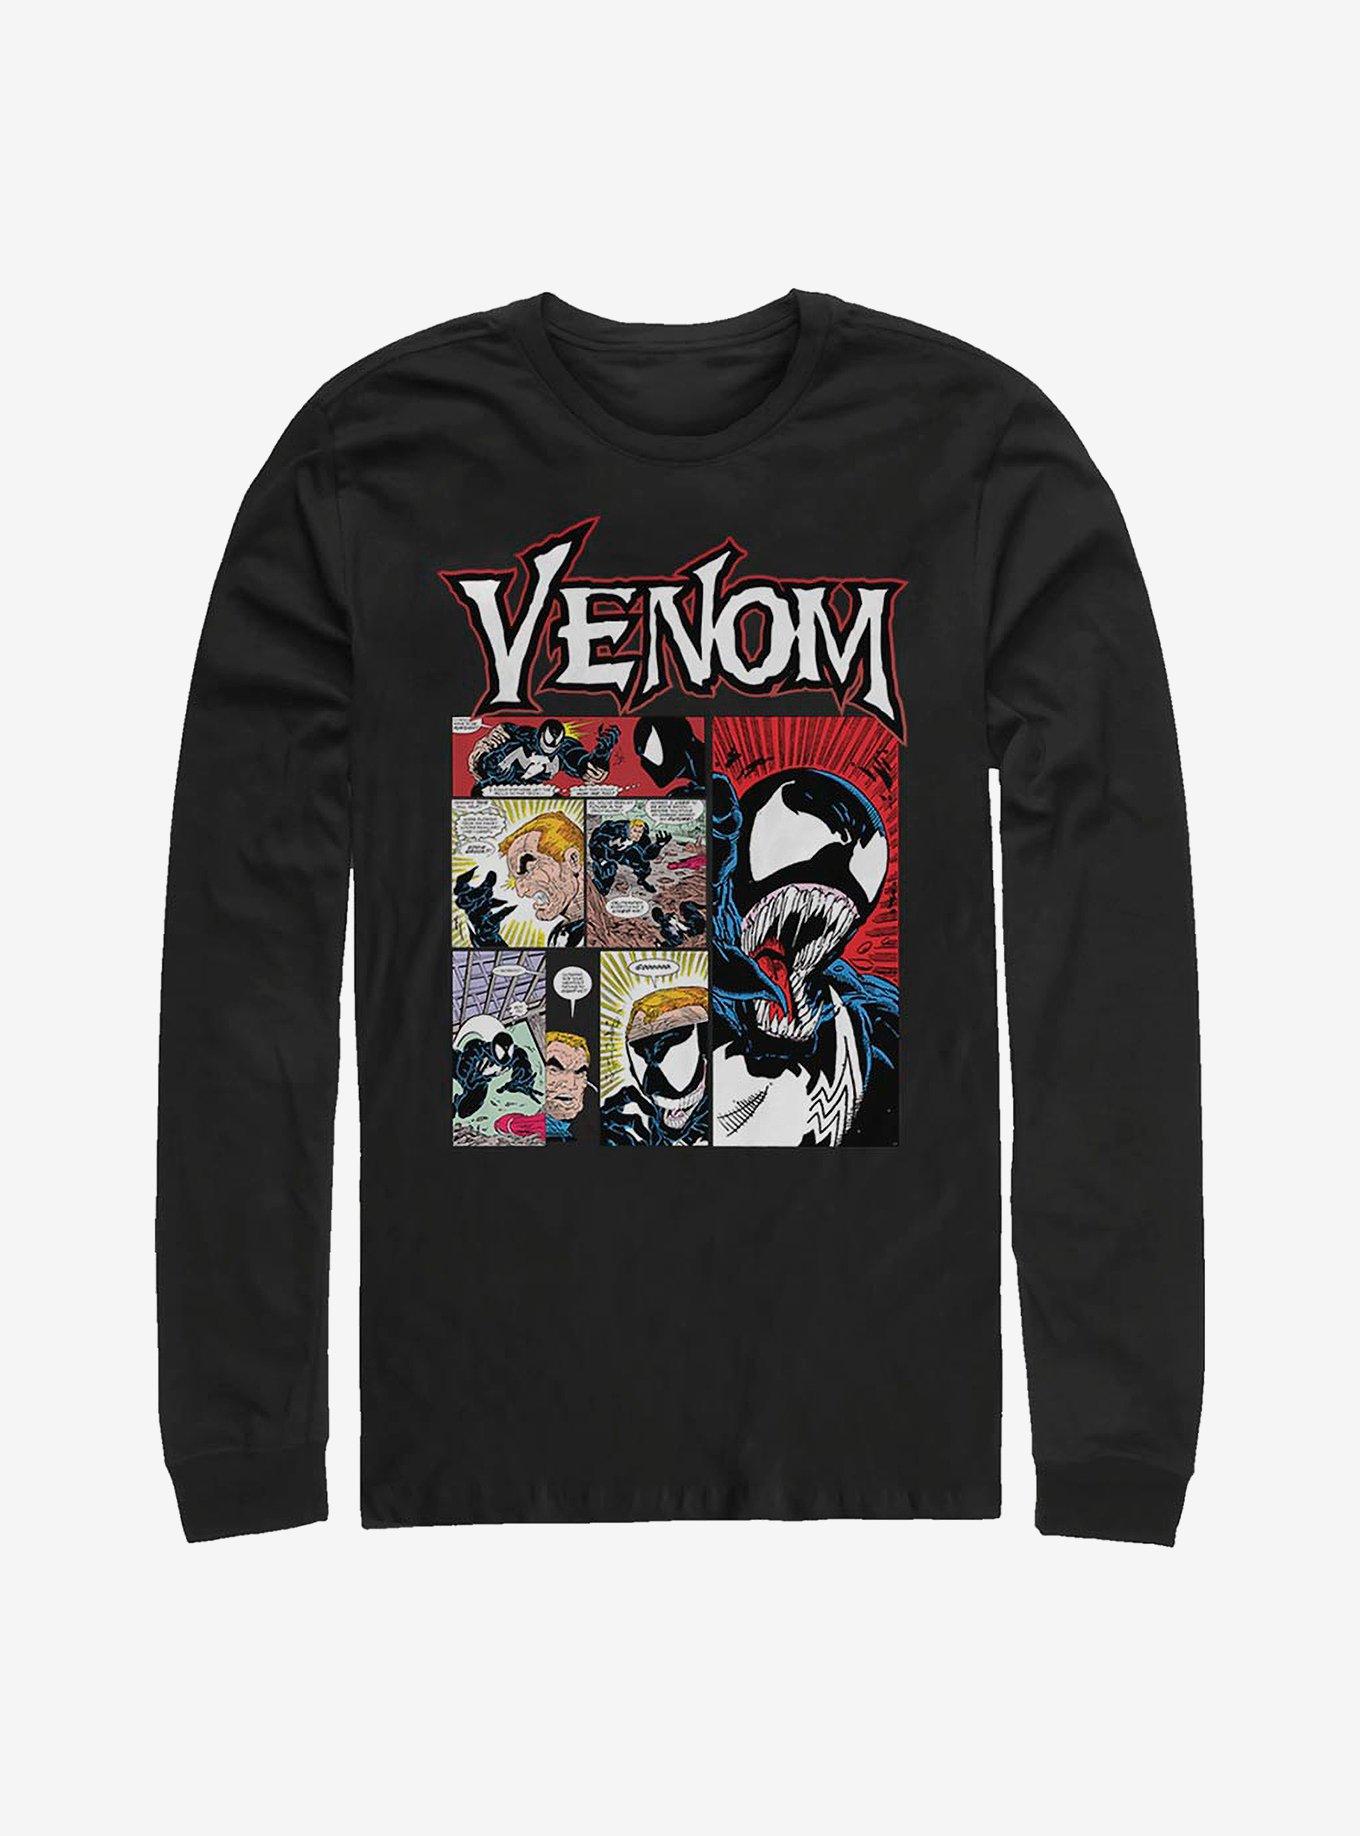 Marvel Venom: Let There Be Carnage Whom The Bell Tolls Long-Sleeve T-Shirt, BLACK, hi-res